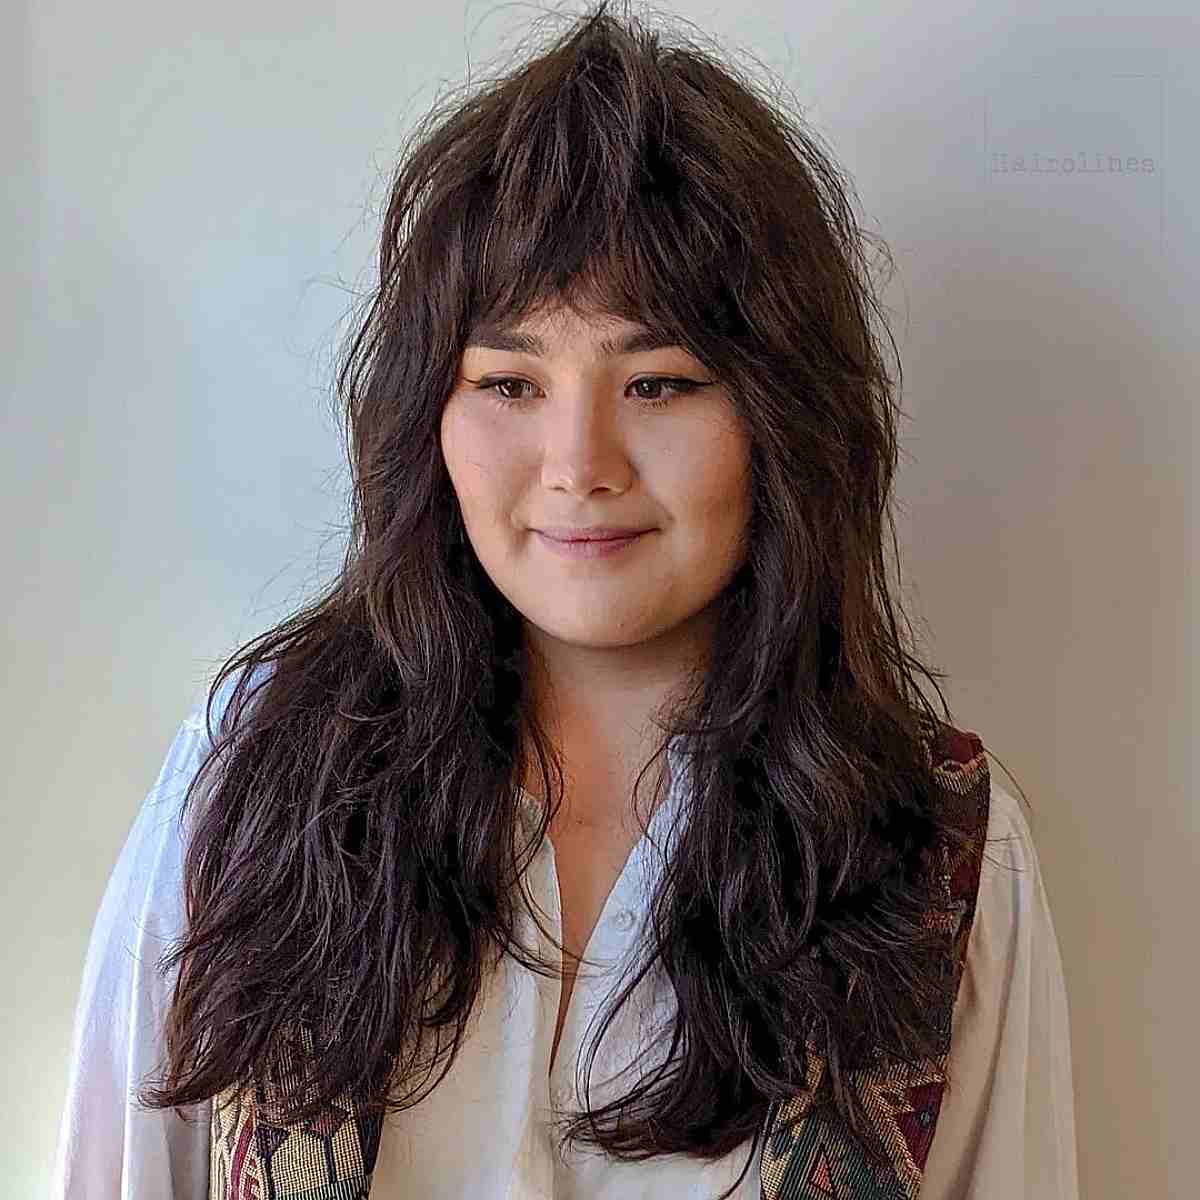 Textured, Choppy Layers with Bangs on Long Hair